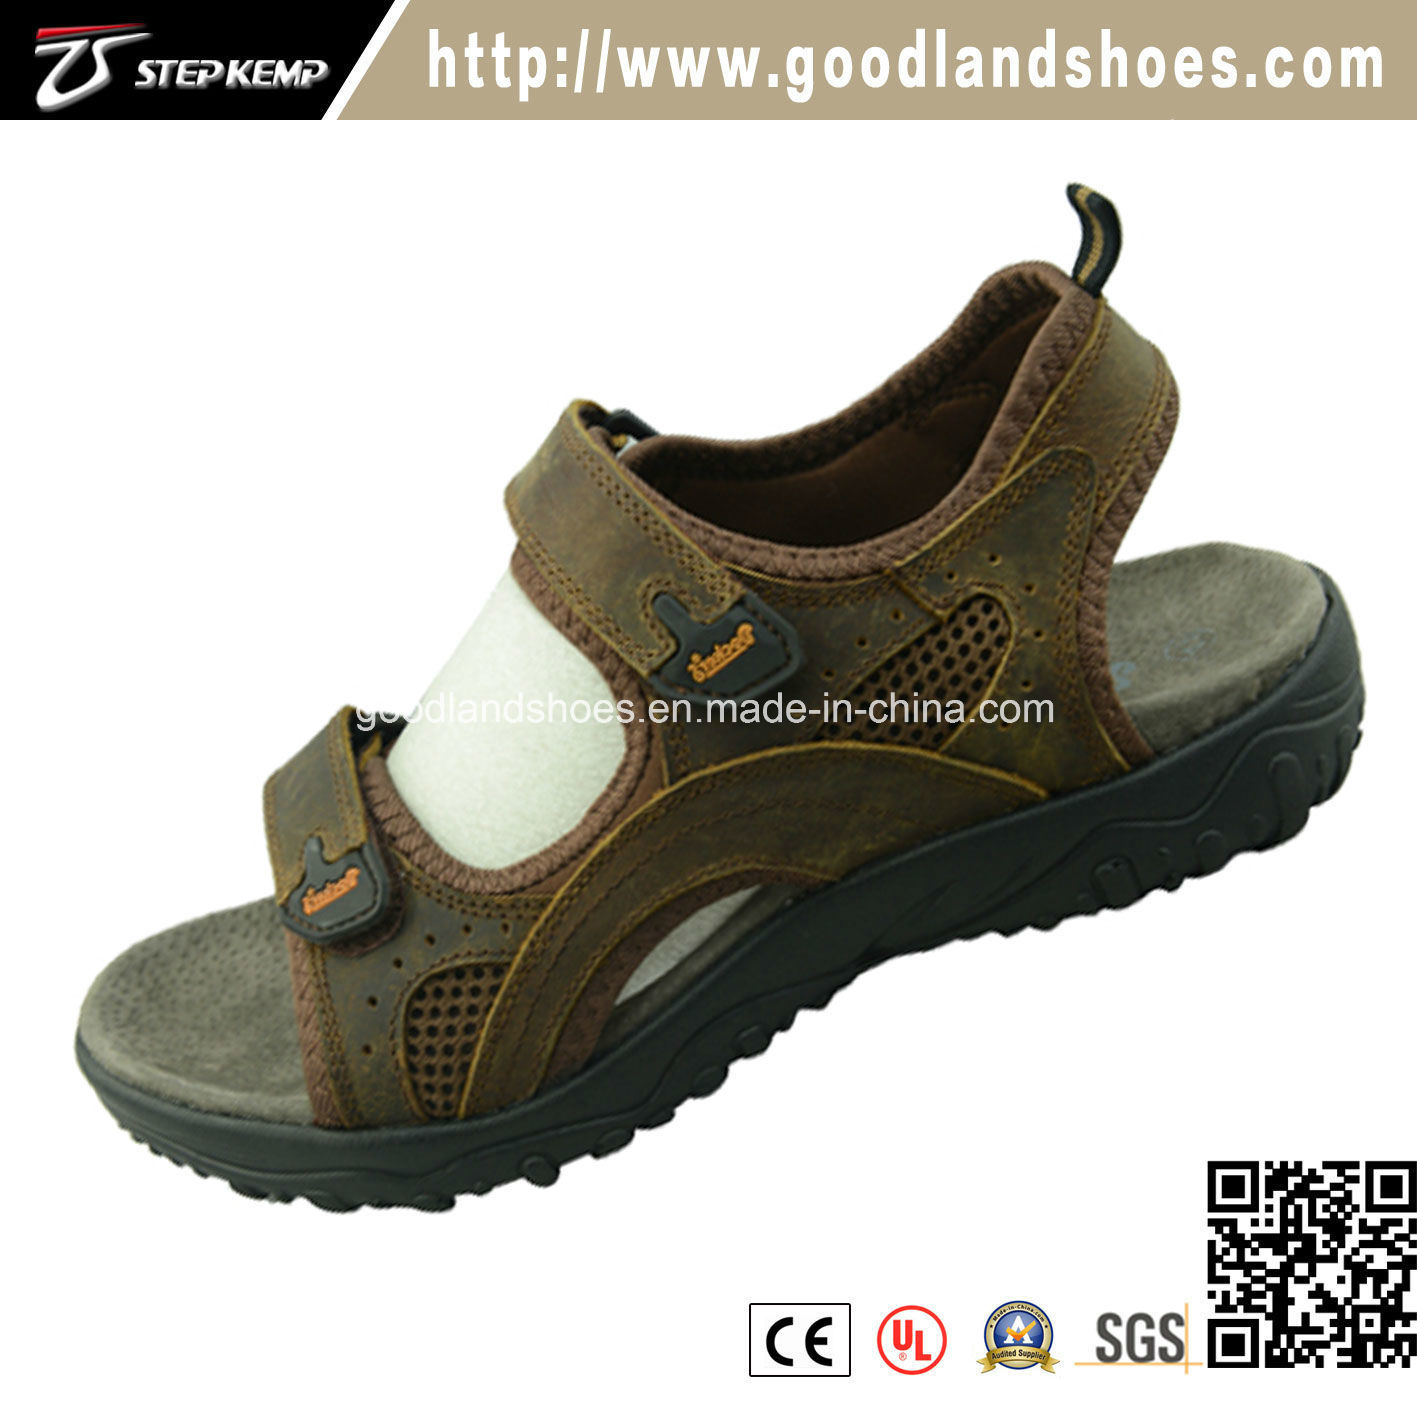 New Fashion Style Top Leather Breathable Men's Sandal Shoes 20037